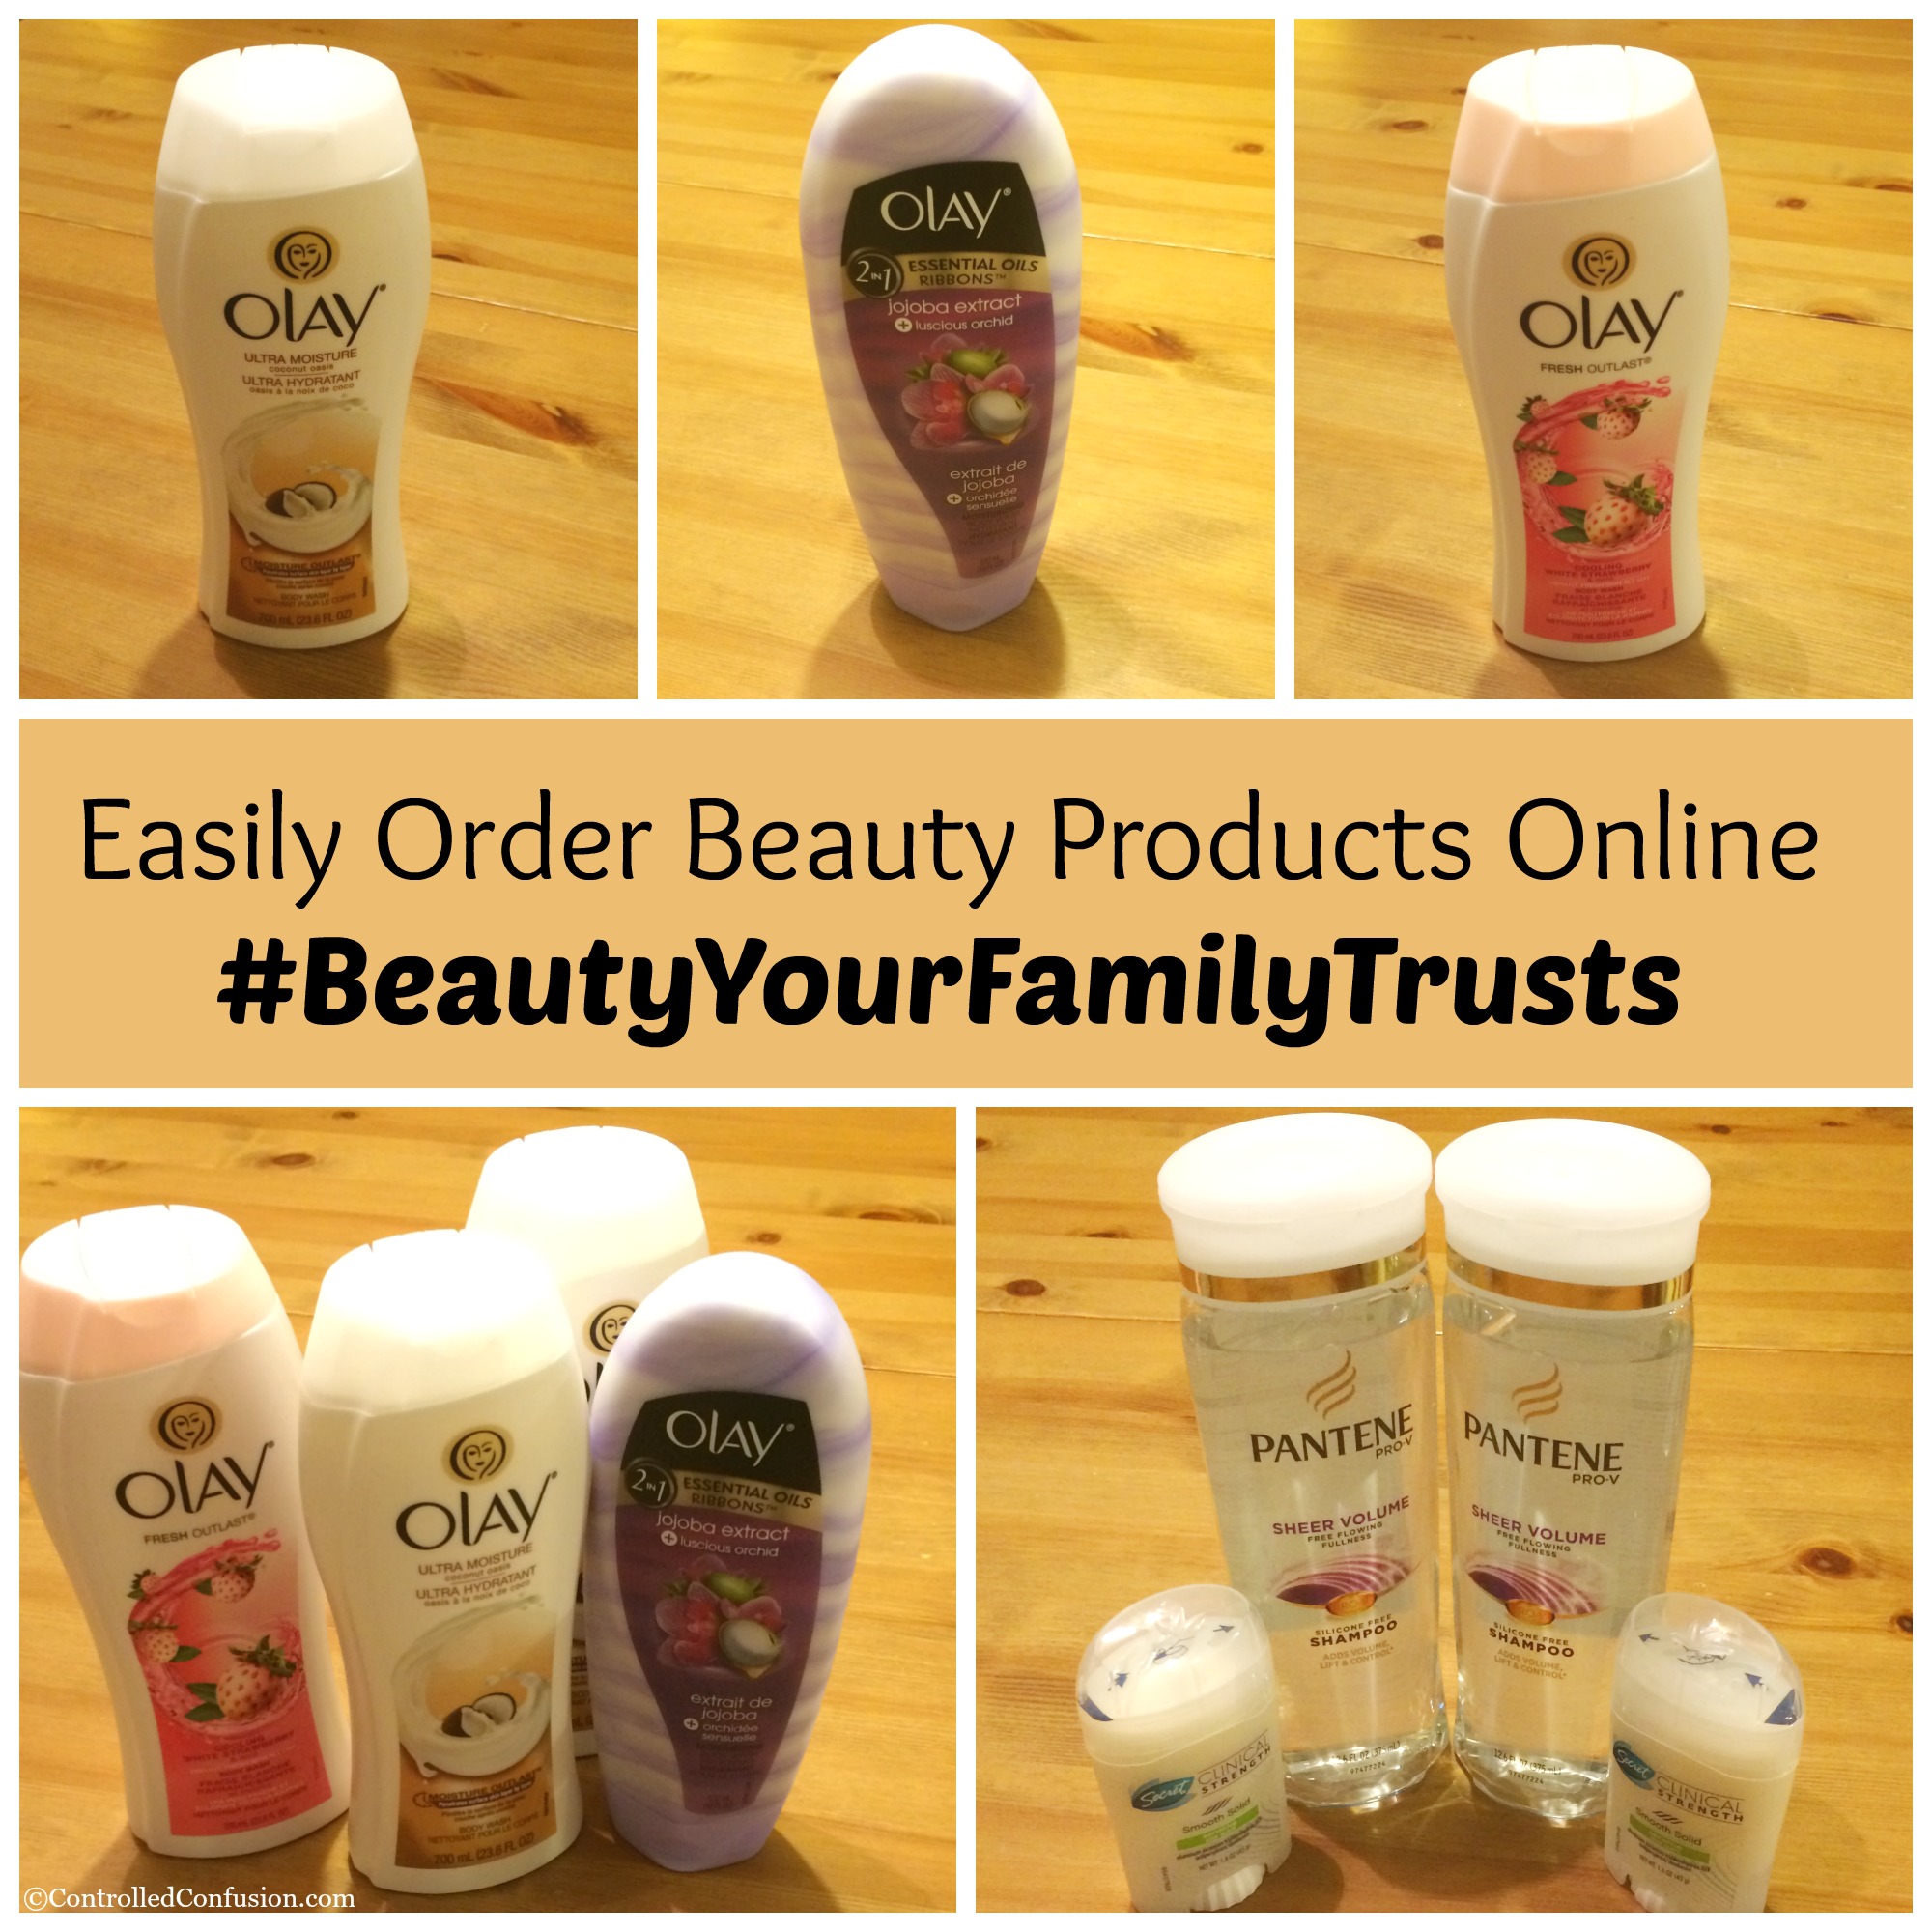 Easily Order Beauty Products Online #BeautyYourFamilyTrusts